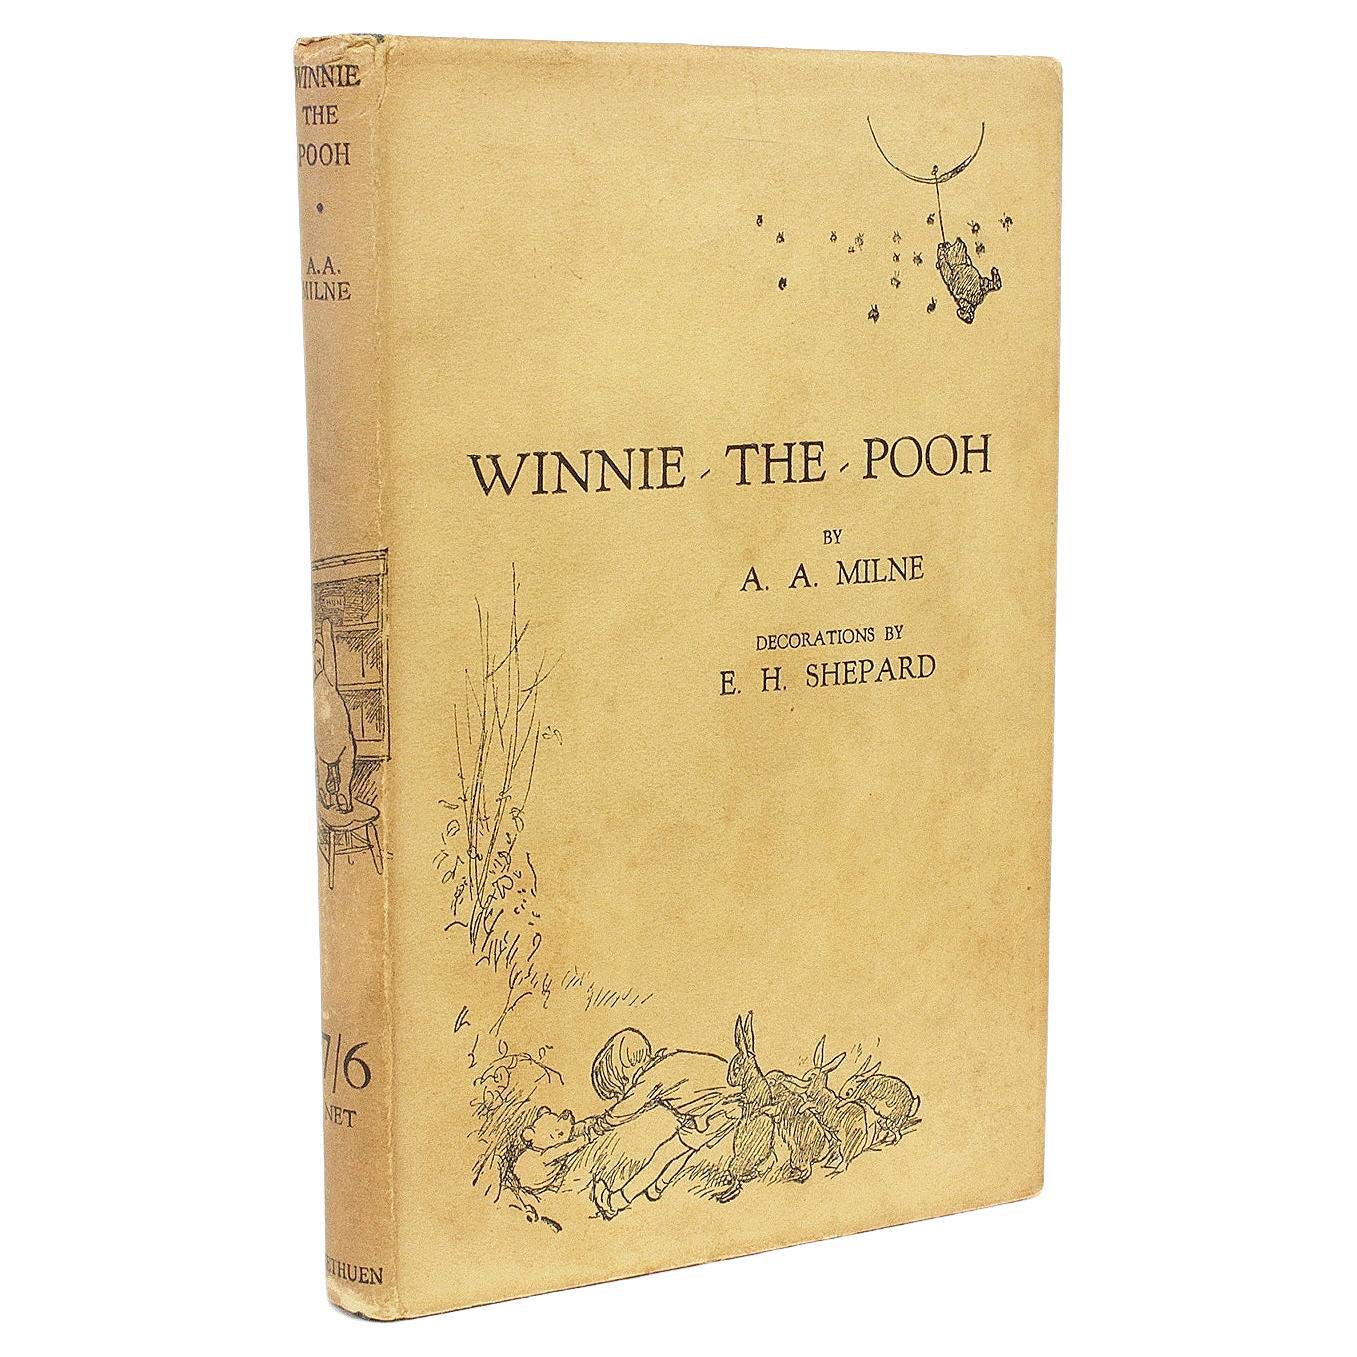 A. A. Milne - Winnie The Pooh - 1926 - FIRST EDITION FIRST PRINTING WITH THE DJ